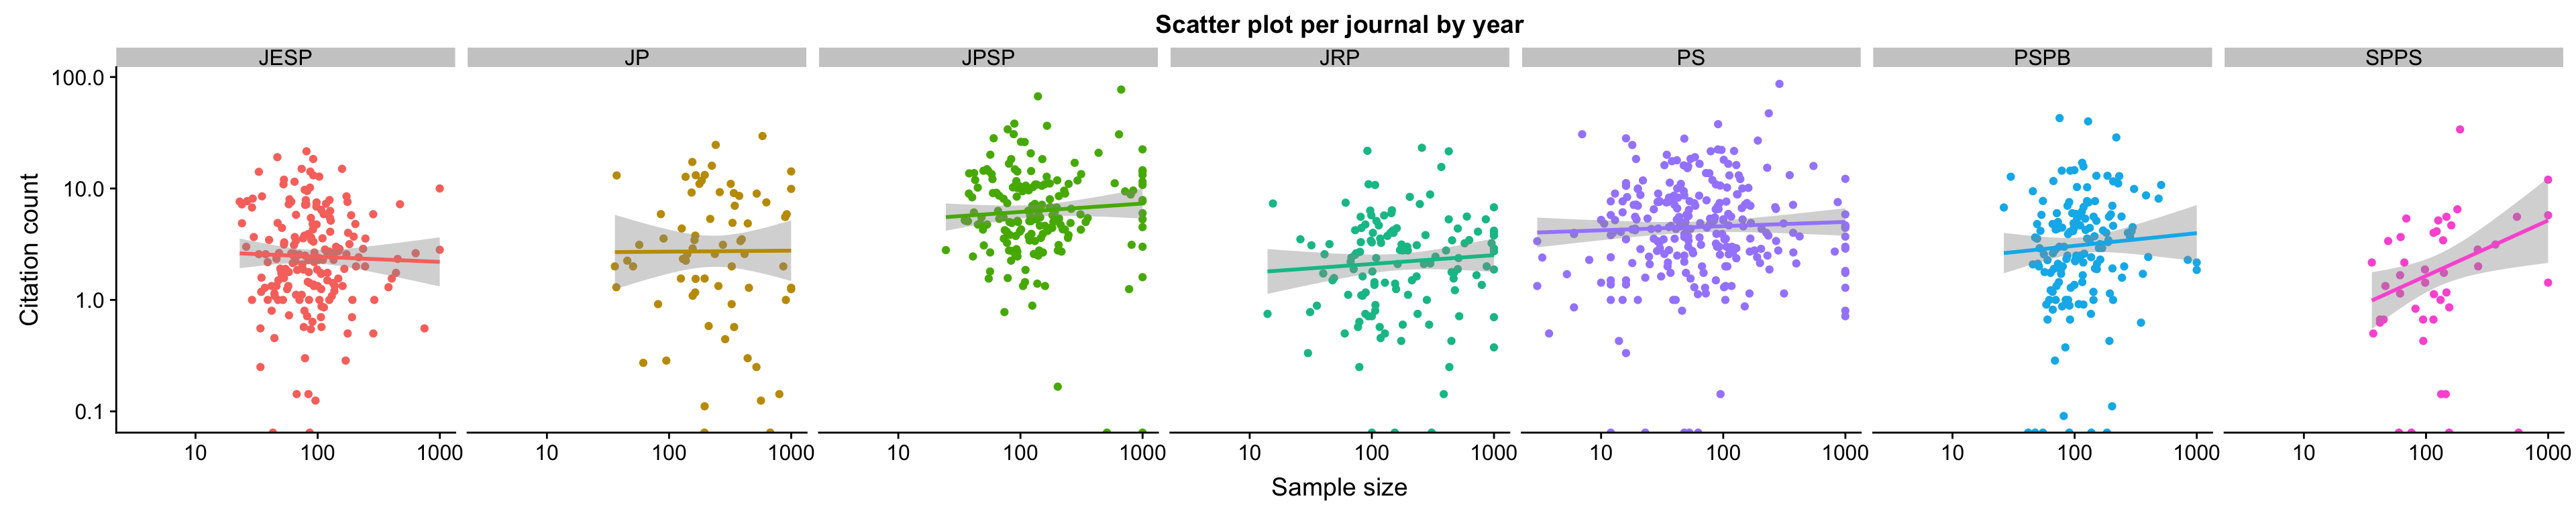 Because there is no sample size trend, citations over years published is not related to sample size any differently than simple citation count.